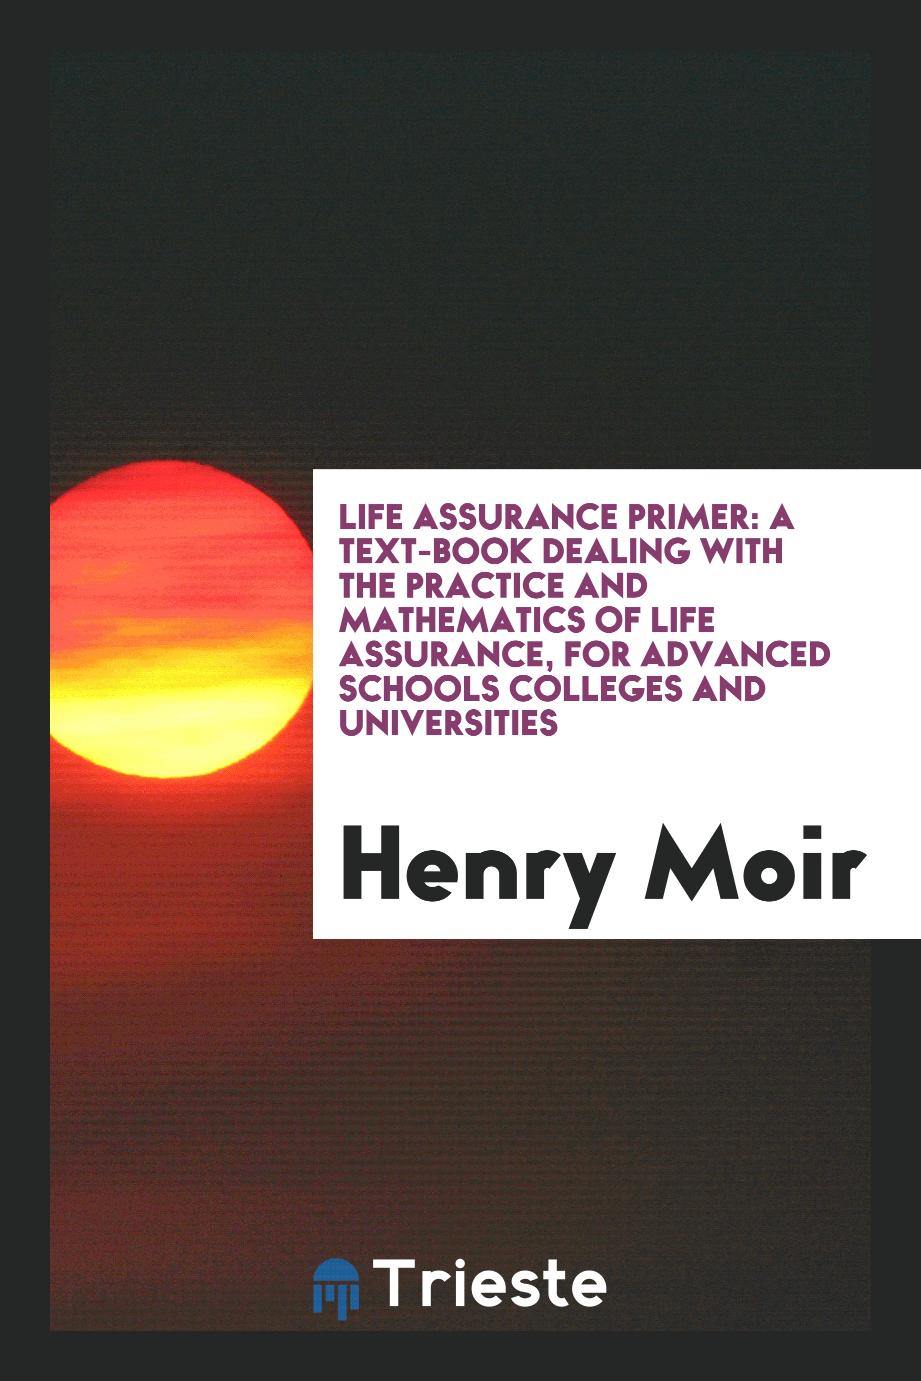 Life Assurance Primer: A Text-Book Dealing with the Practice and Mathematics of Life Assurance, for Advanced Schools Colleges and Universities